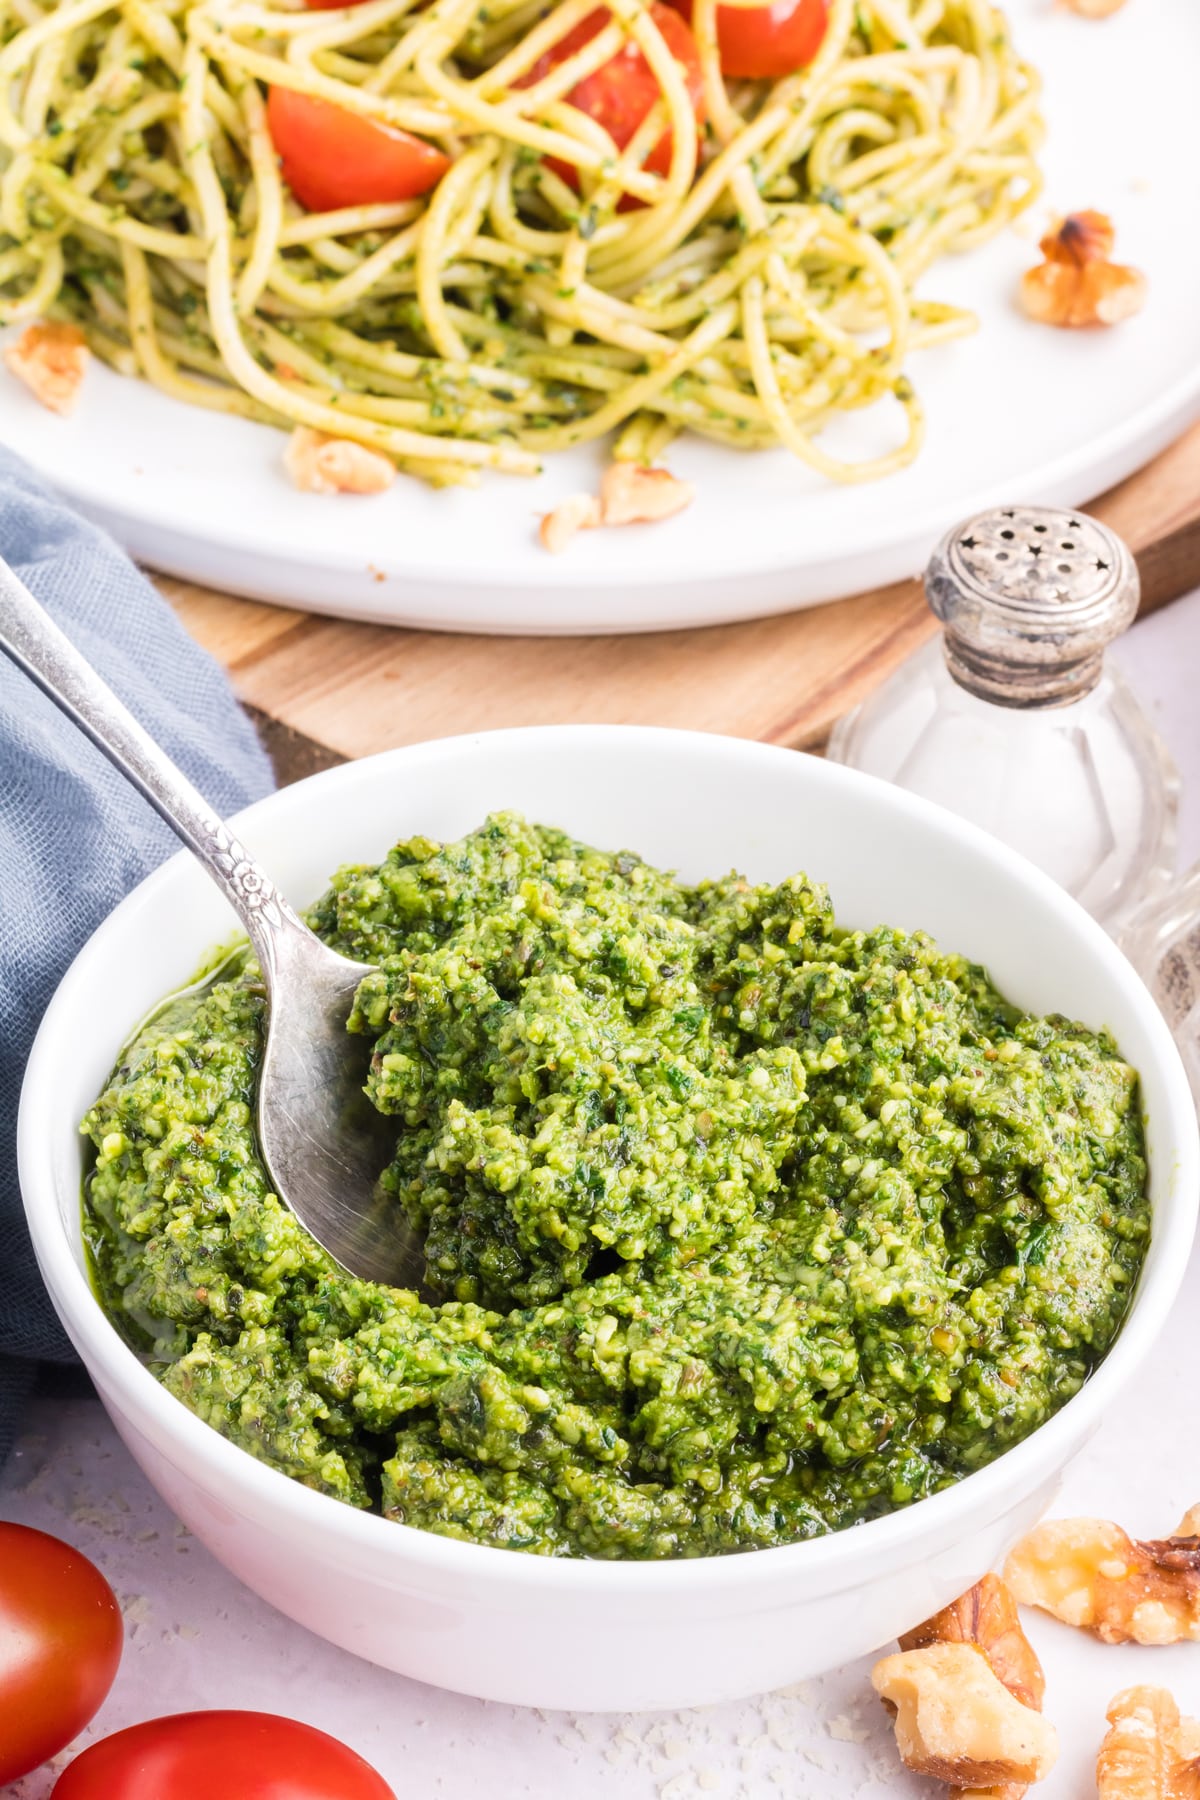 A bowl of pesto with tomatoes and basil.